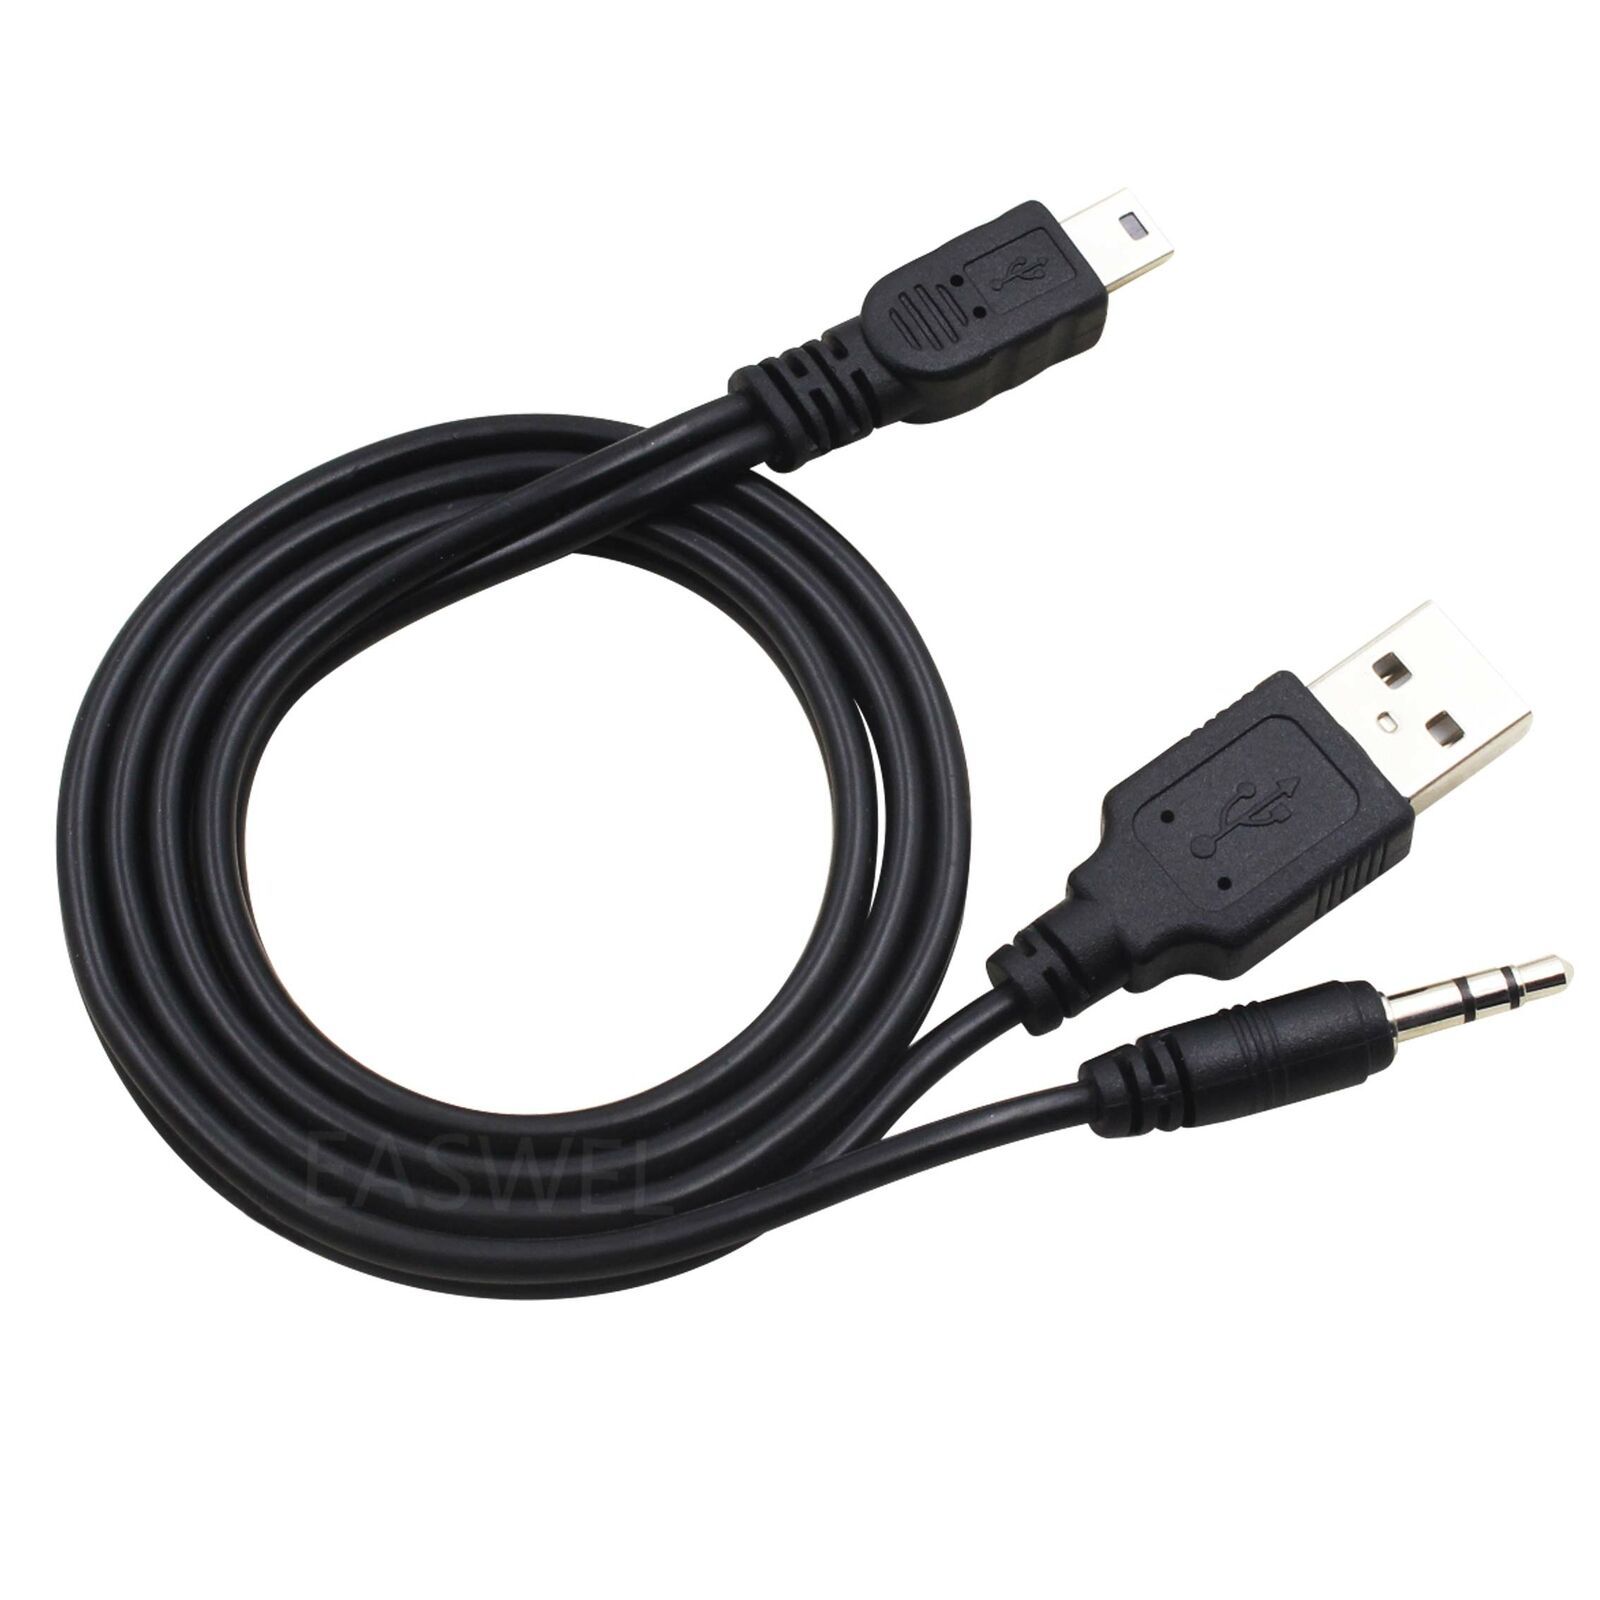 Primary image for 3.5mm USB to Mini USB Aux Cable Power Charger For iHome iBT60 Portable Speaker